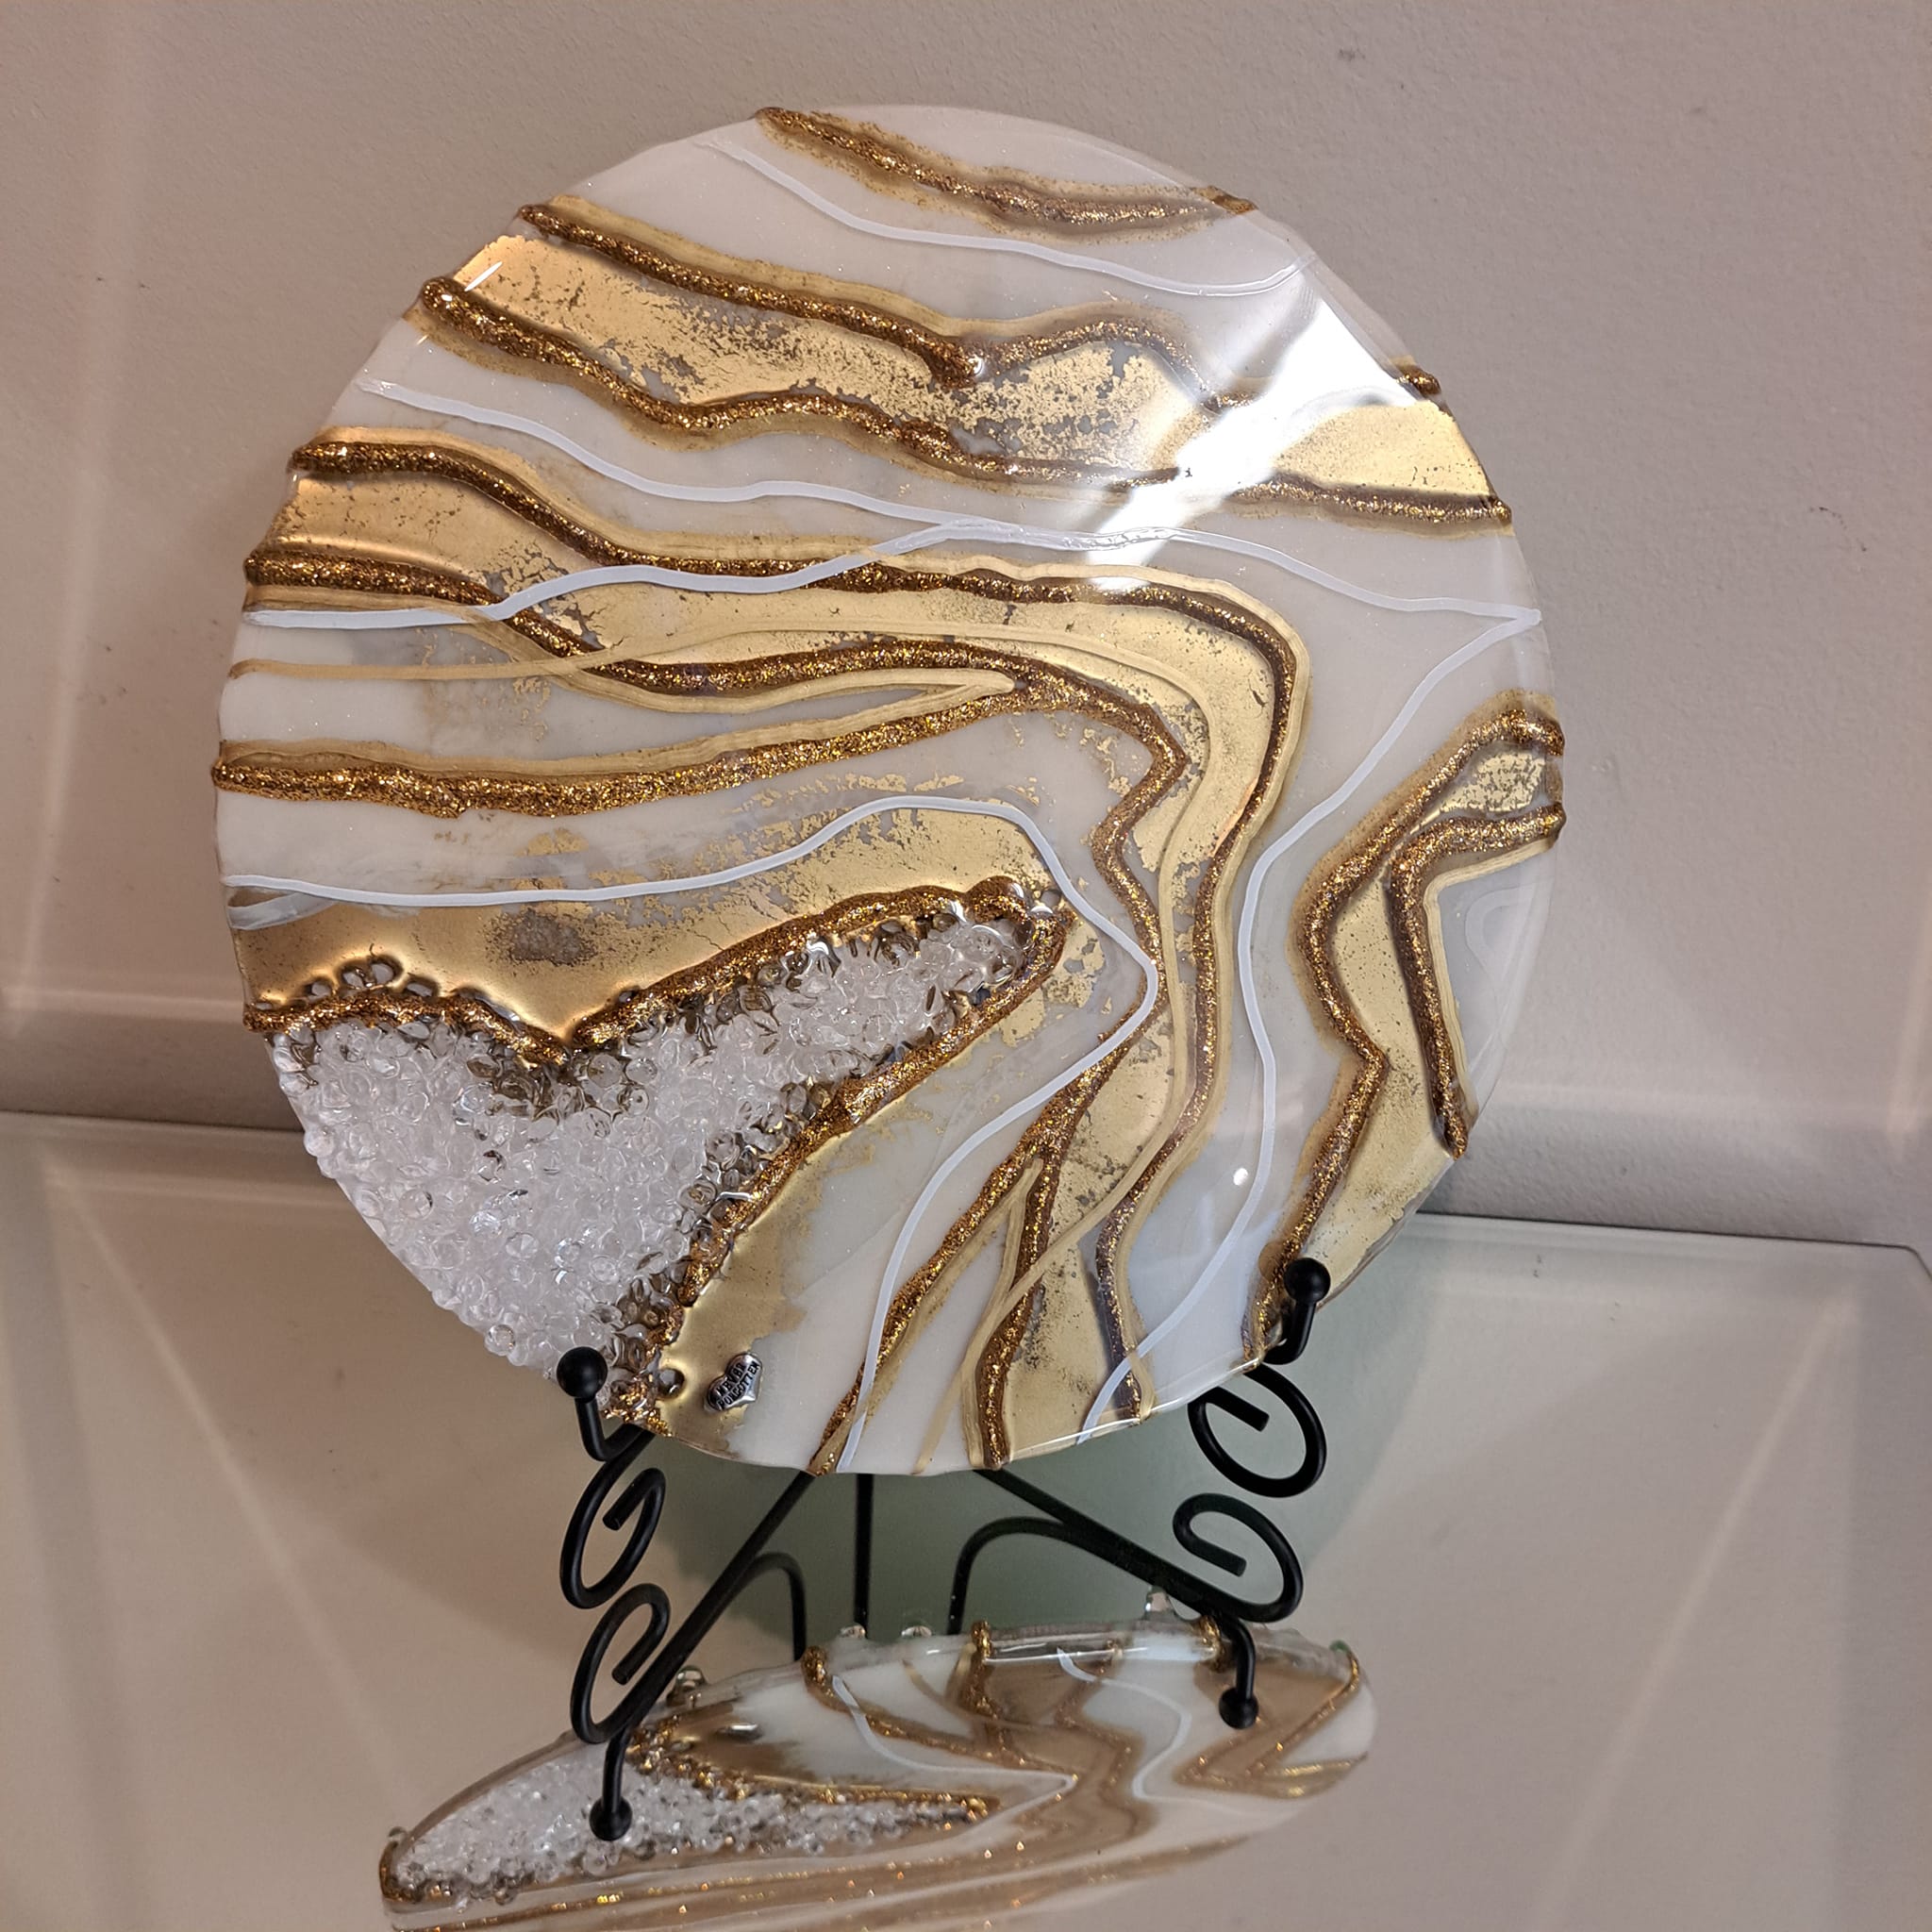 Signature white and gold ashes geode art - only one - see video.